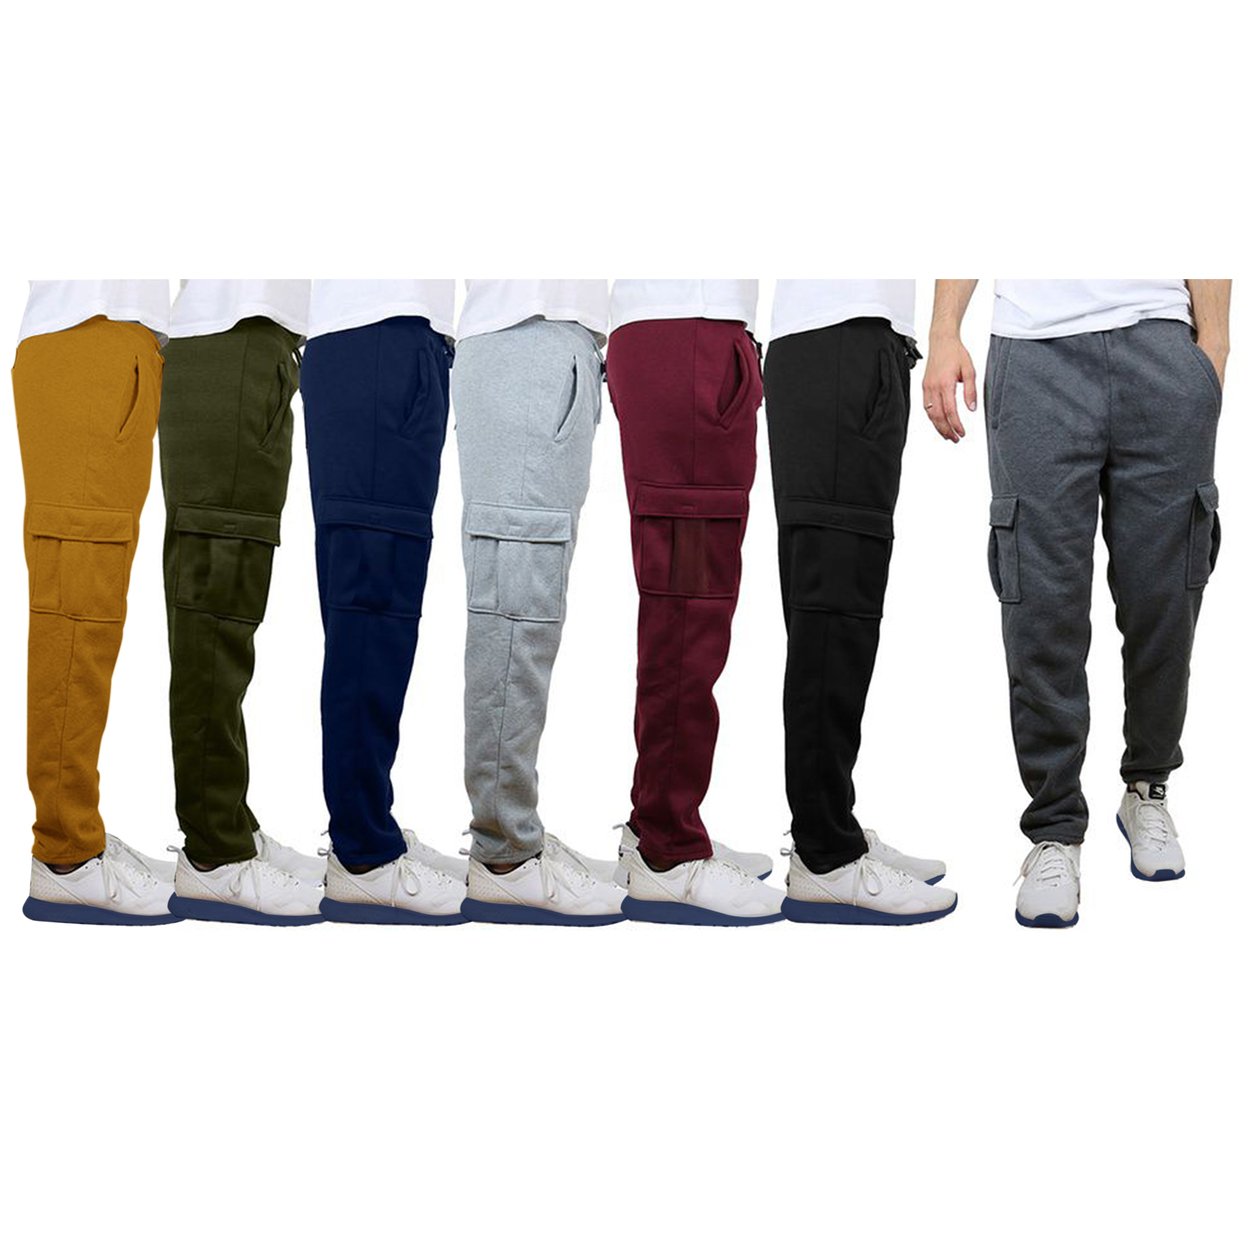 Multipack Men's Casual Solid Cargo Jogger Sweatpants With Pockets - 1, S